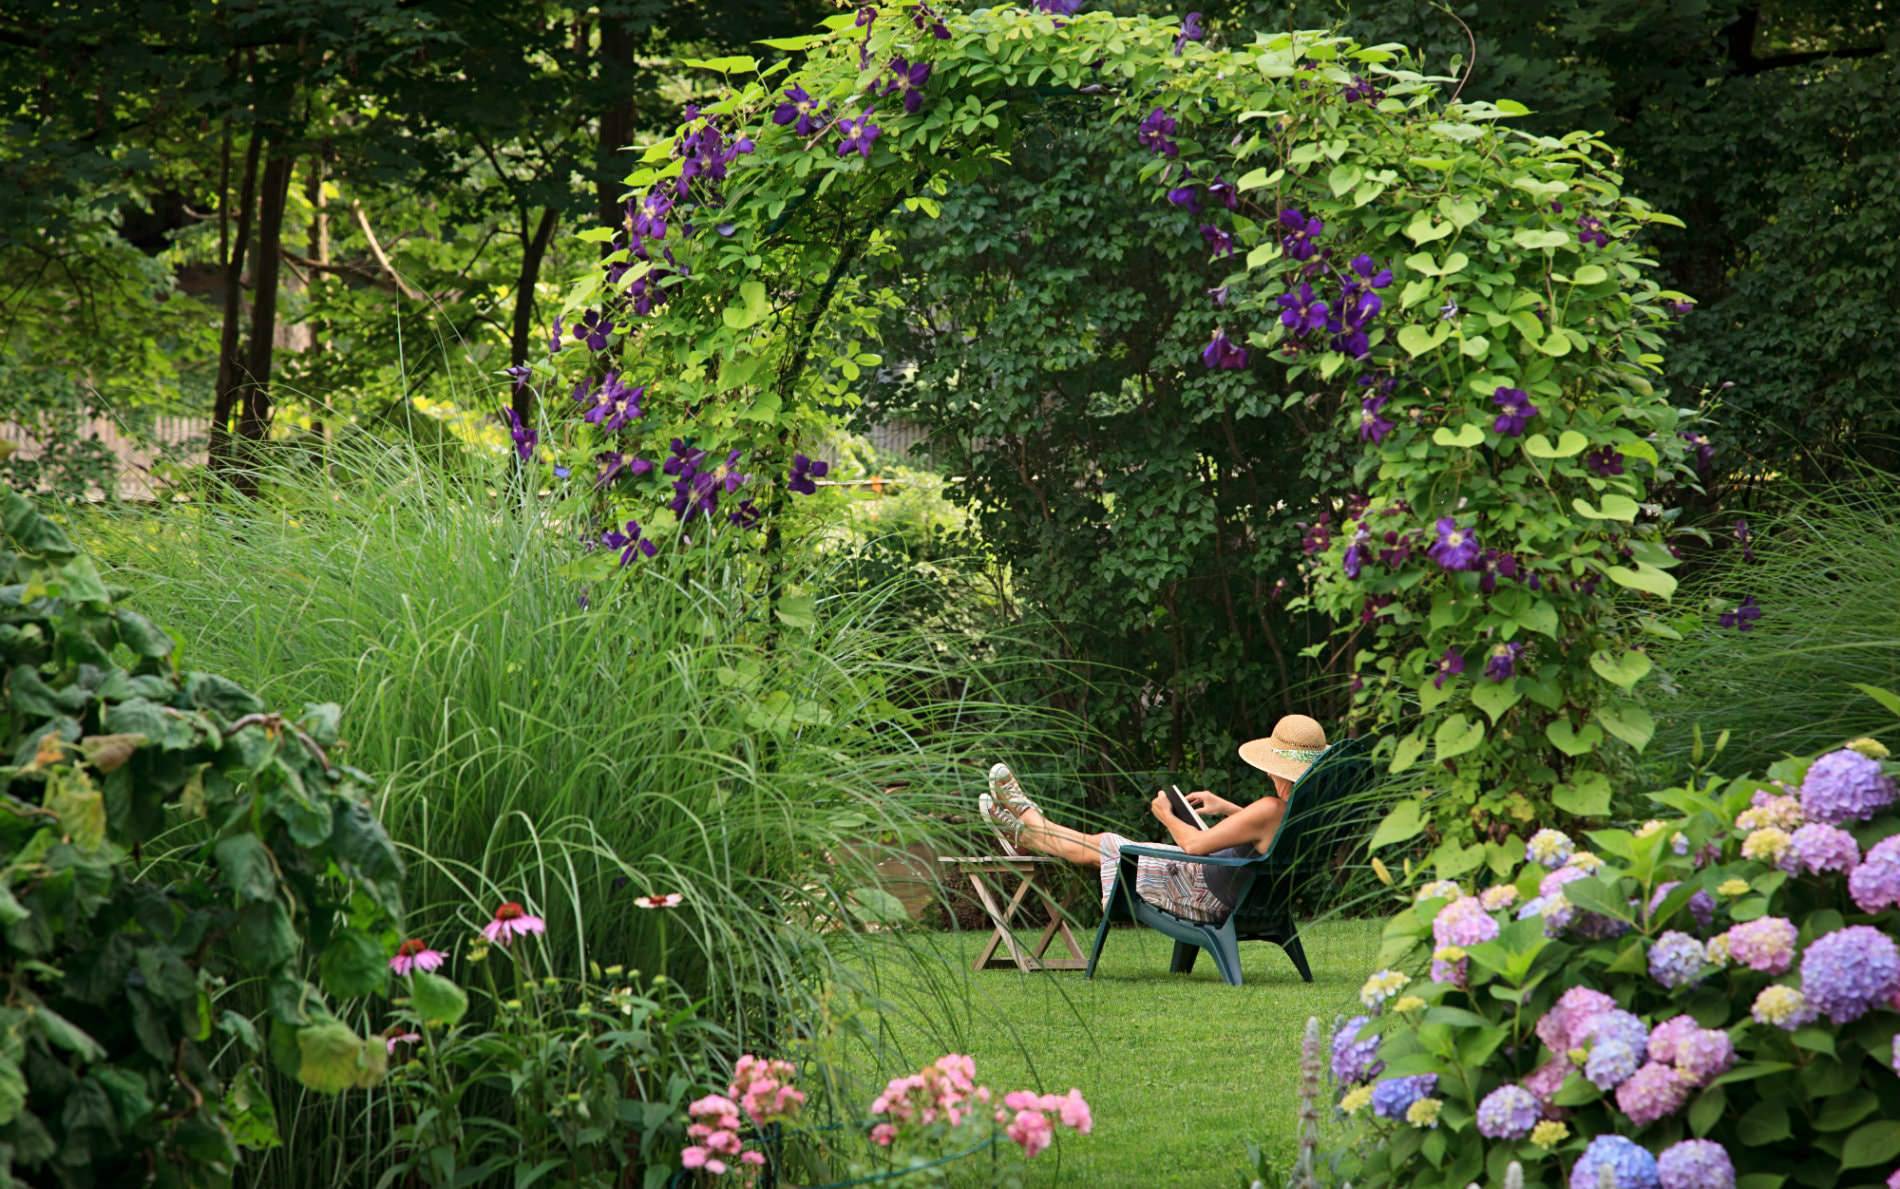 Woman relaxing in an Adirondack chair surrounded by green grass and lush green shrubs, flowers and trees